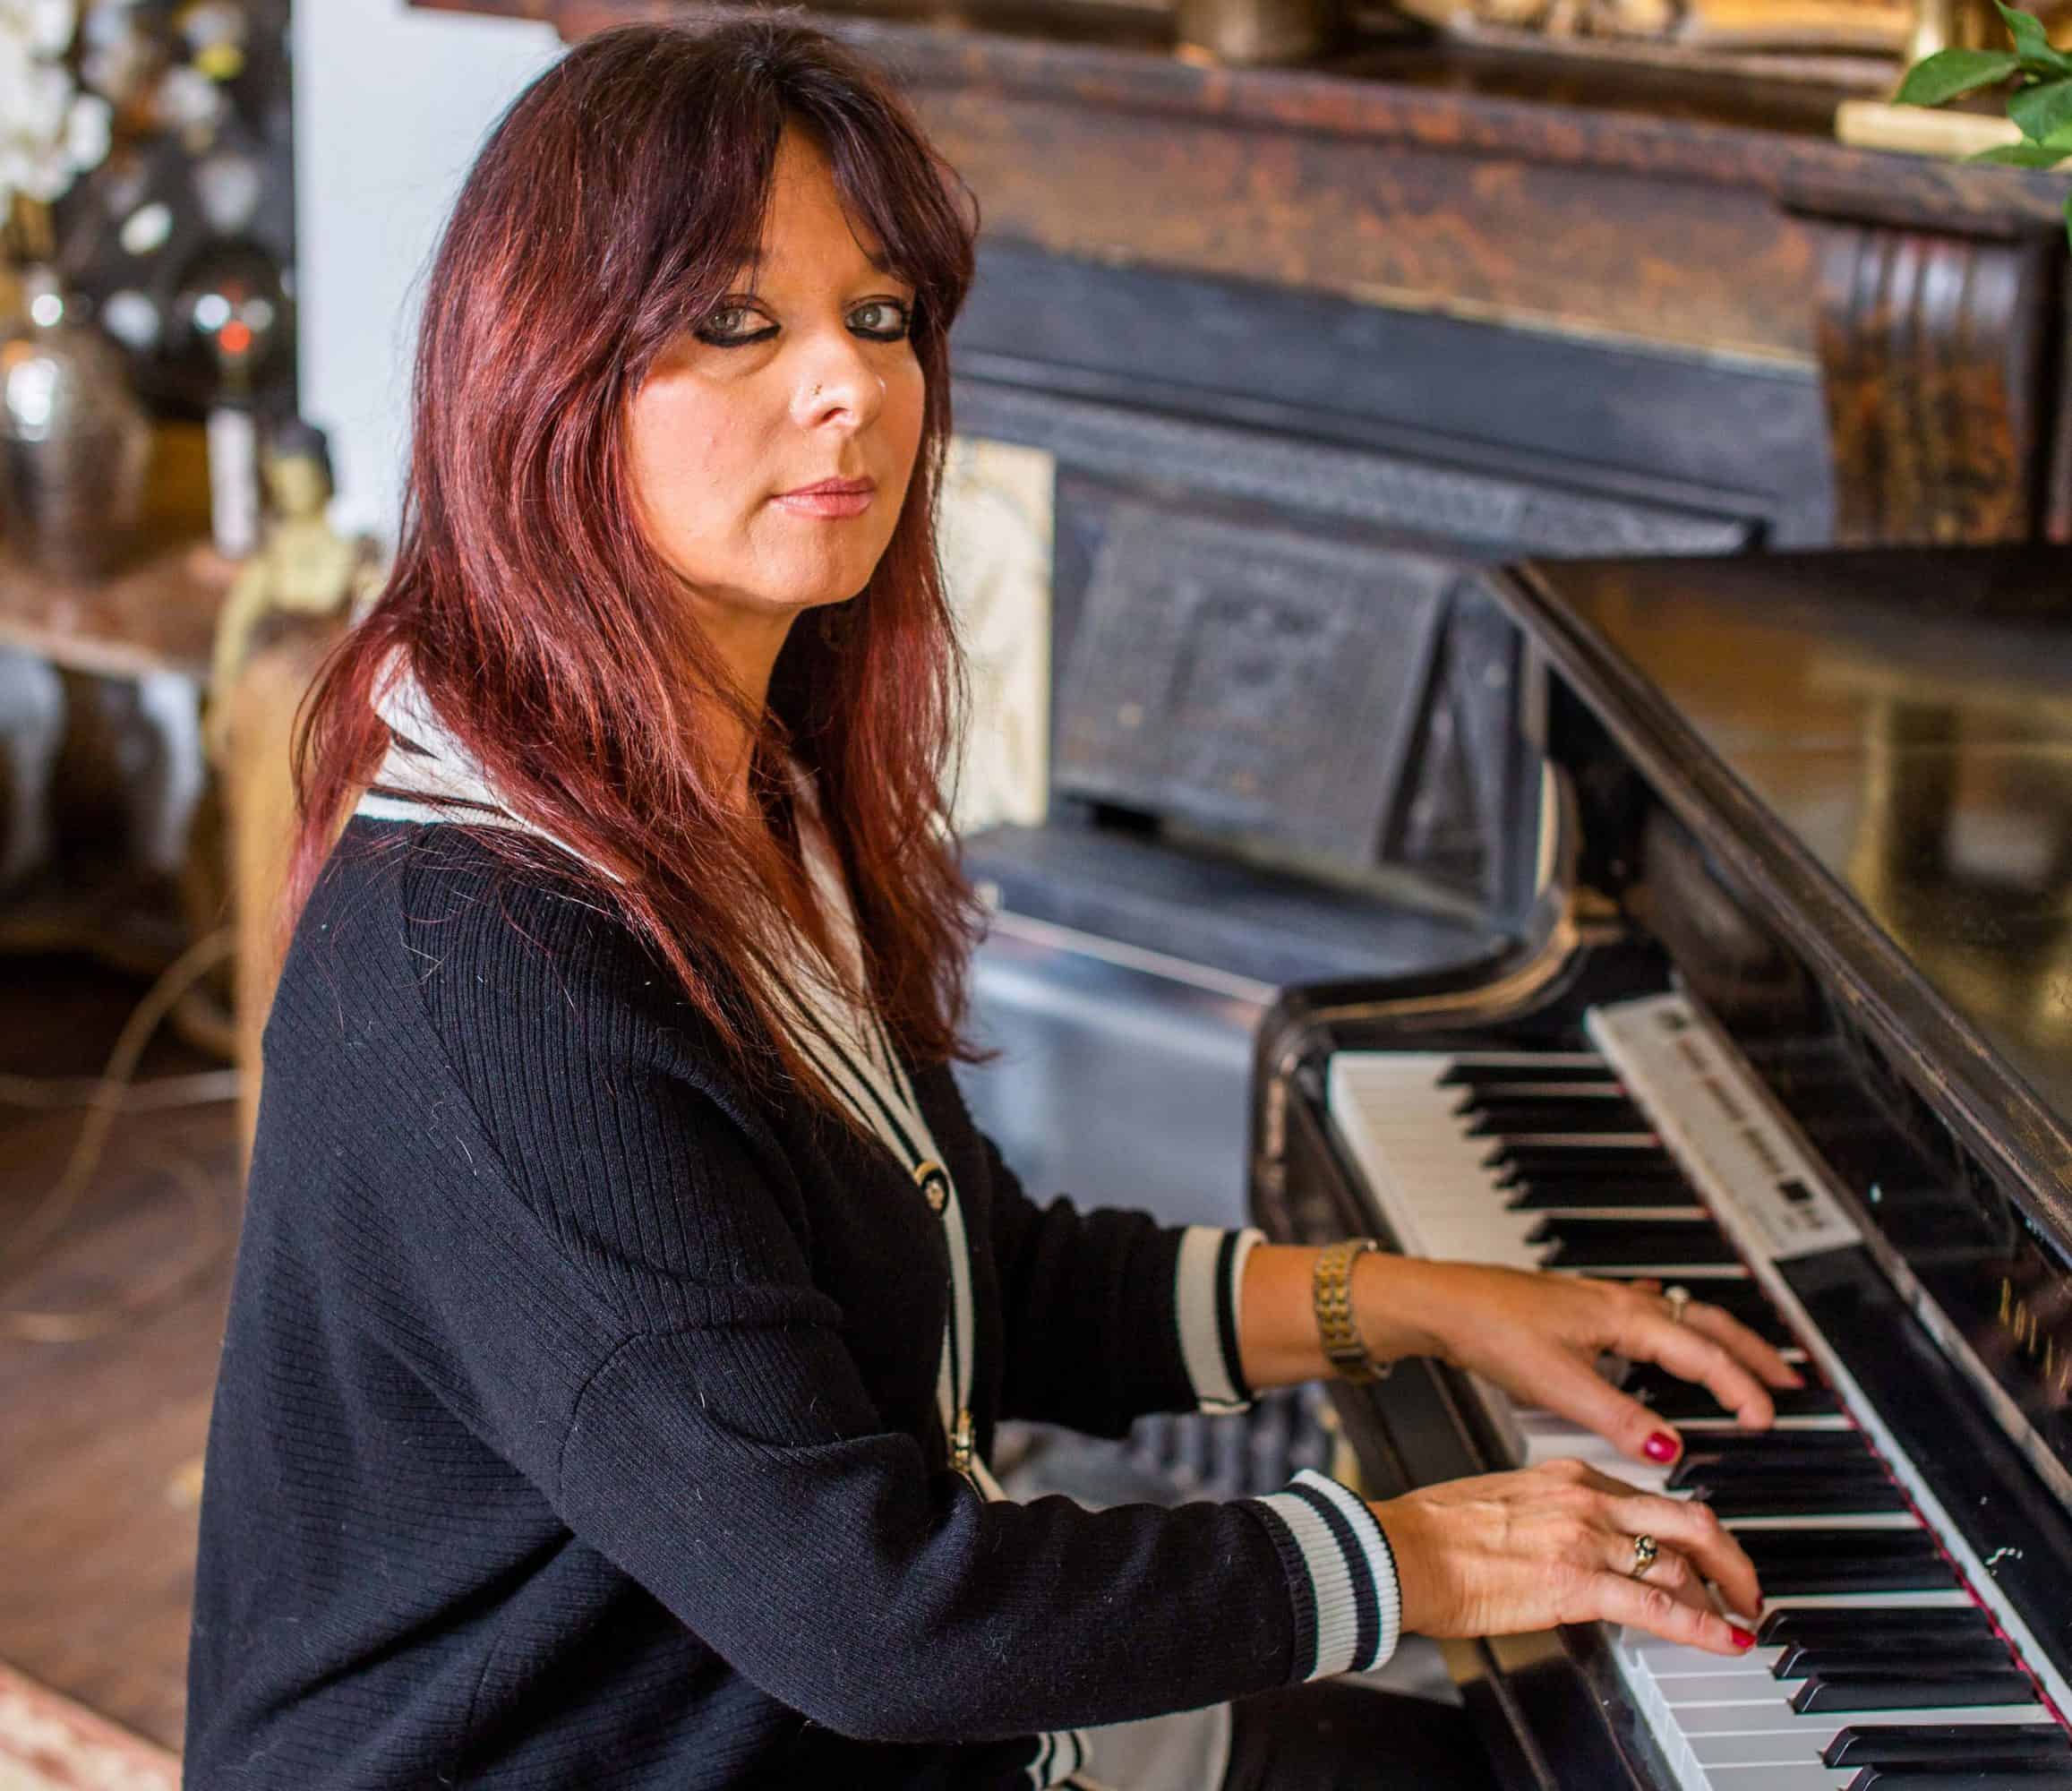 Female pianist who claims she was rejected by BBC breaks through – after pretending to be a man